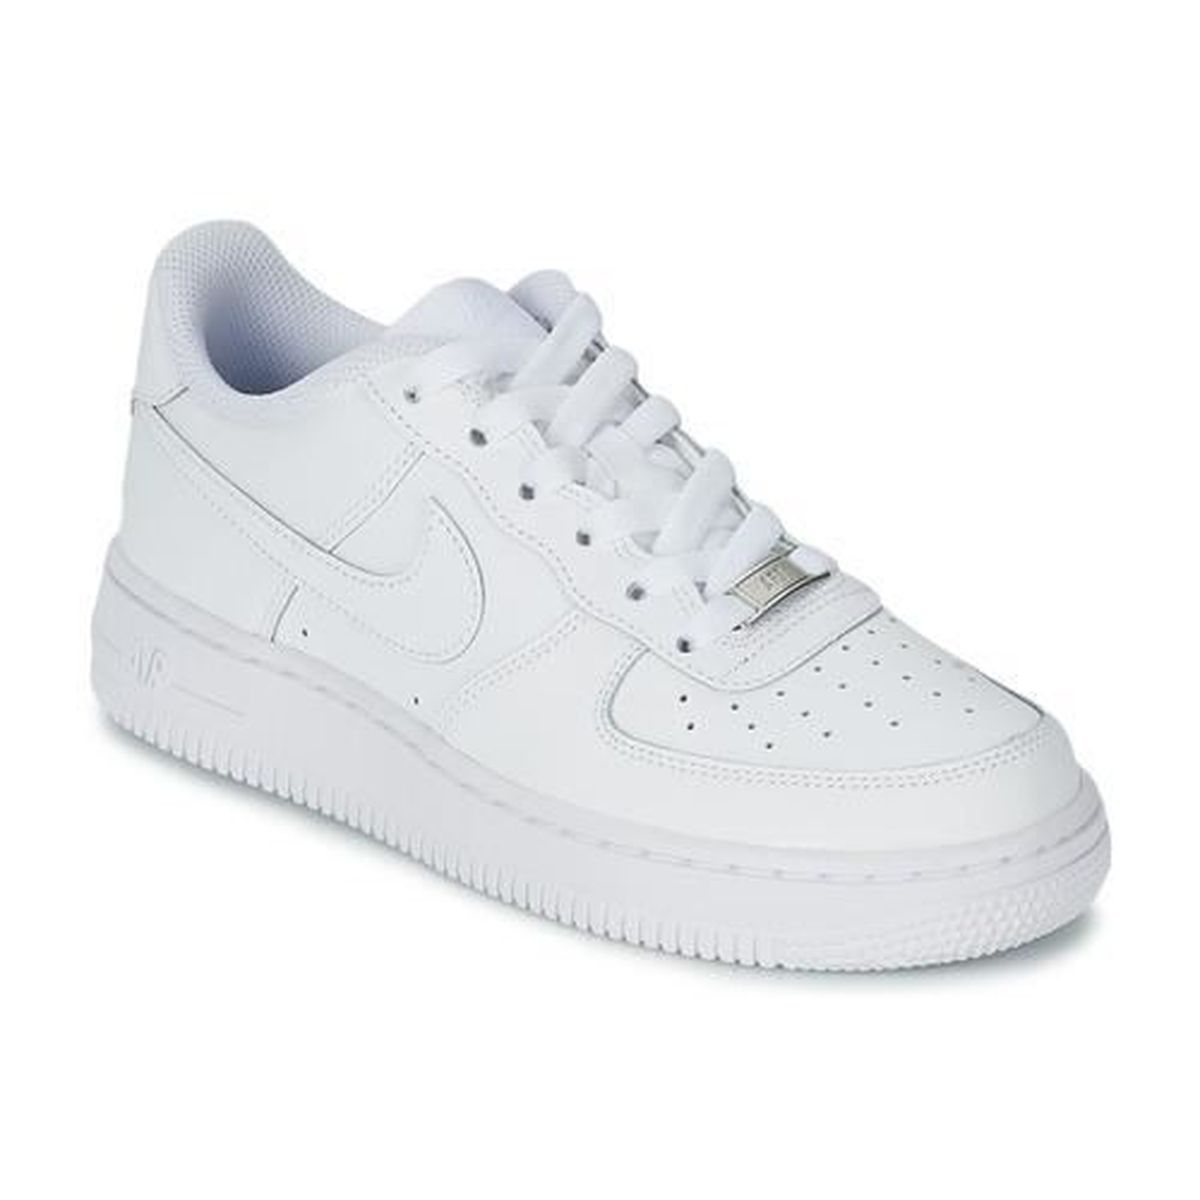 basket air force 1 femme pas cher السيف غاليري قدر ضغط